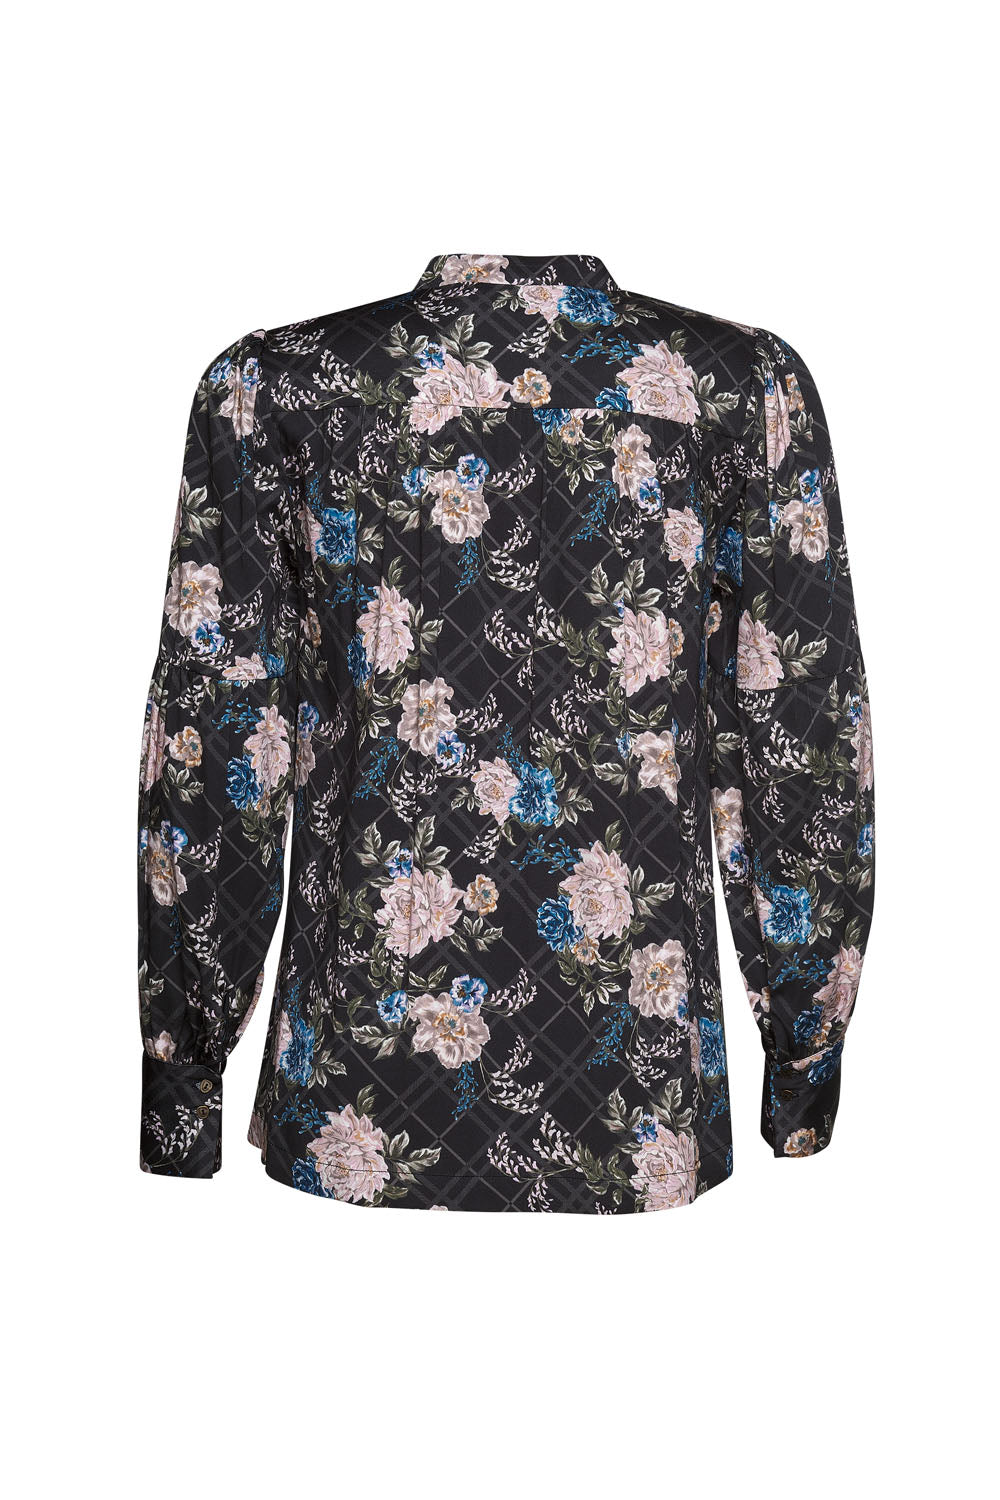 MADLY SWEETLY ROSIE POSIE BLOUSE - THE VOGUE STORE